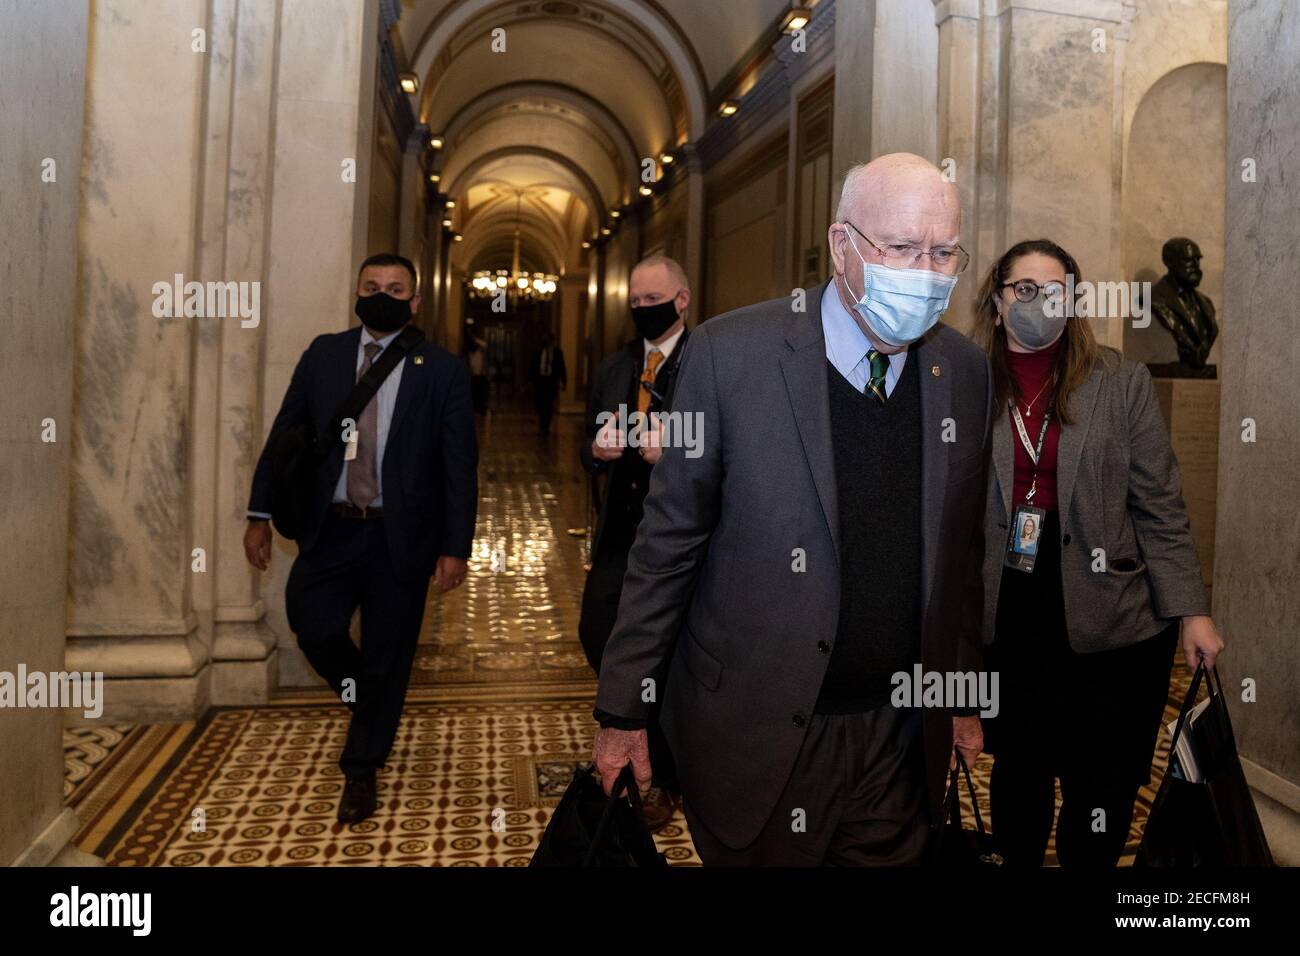 Washington, United States. 13th Feb, 2021. Senator Patrick Leahy, D-VT, departs the U.S. Capitol in Washington, DC on Saturday, February 13, 2021 after Donald Trump's second impeachment trial ended in a not guilty verdict. The Senate voted Trump guilty 57-43, short of the 2/3 majority needed for conviction. Pool photo by Stefani Reynolds/UPI Credit: UPI/Alamy Live News Stock Photo